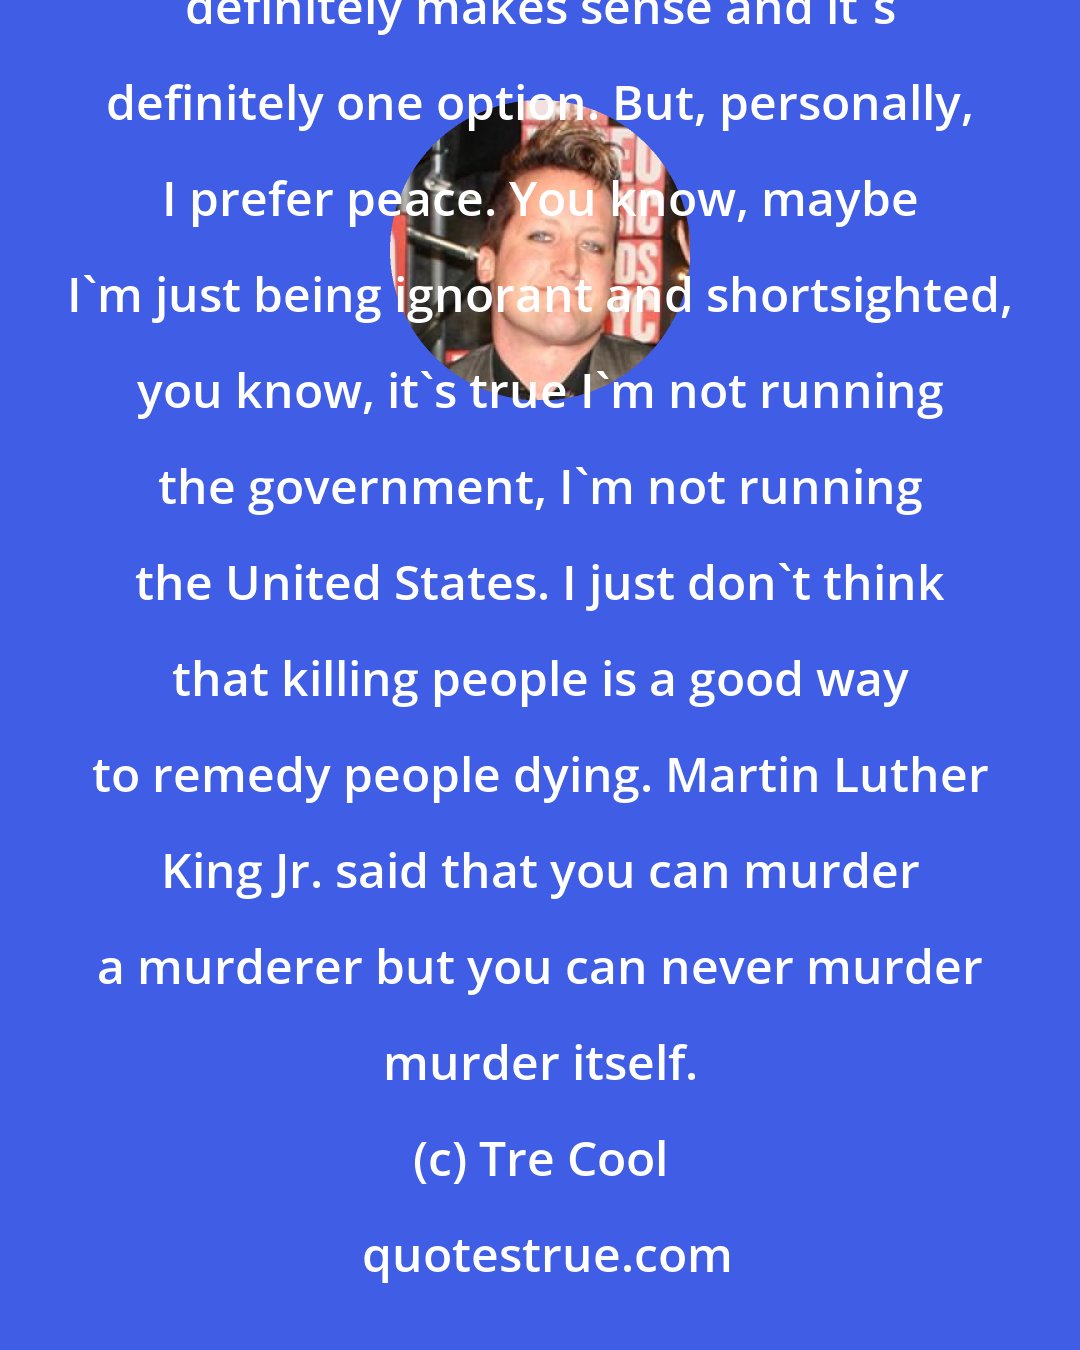 Tre Cool: I object. I object to any killing at all. You know, it's terrible what happened and I think retaliation definitely makes sense and it's definitely one option. But, personally, I prefer peace. You know, maybe I'm just being ignorant and shortsighted, you know, it's true I'm not running the government, I'm not running the United States. I just don't think that killing people is a good way to remedy people dying. Martin Luther King Jr. said that you can murder a murderer but you can never murder murder itself.